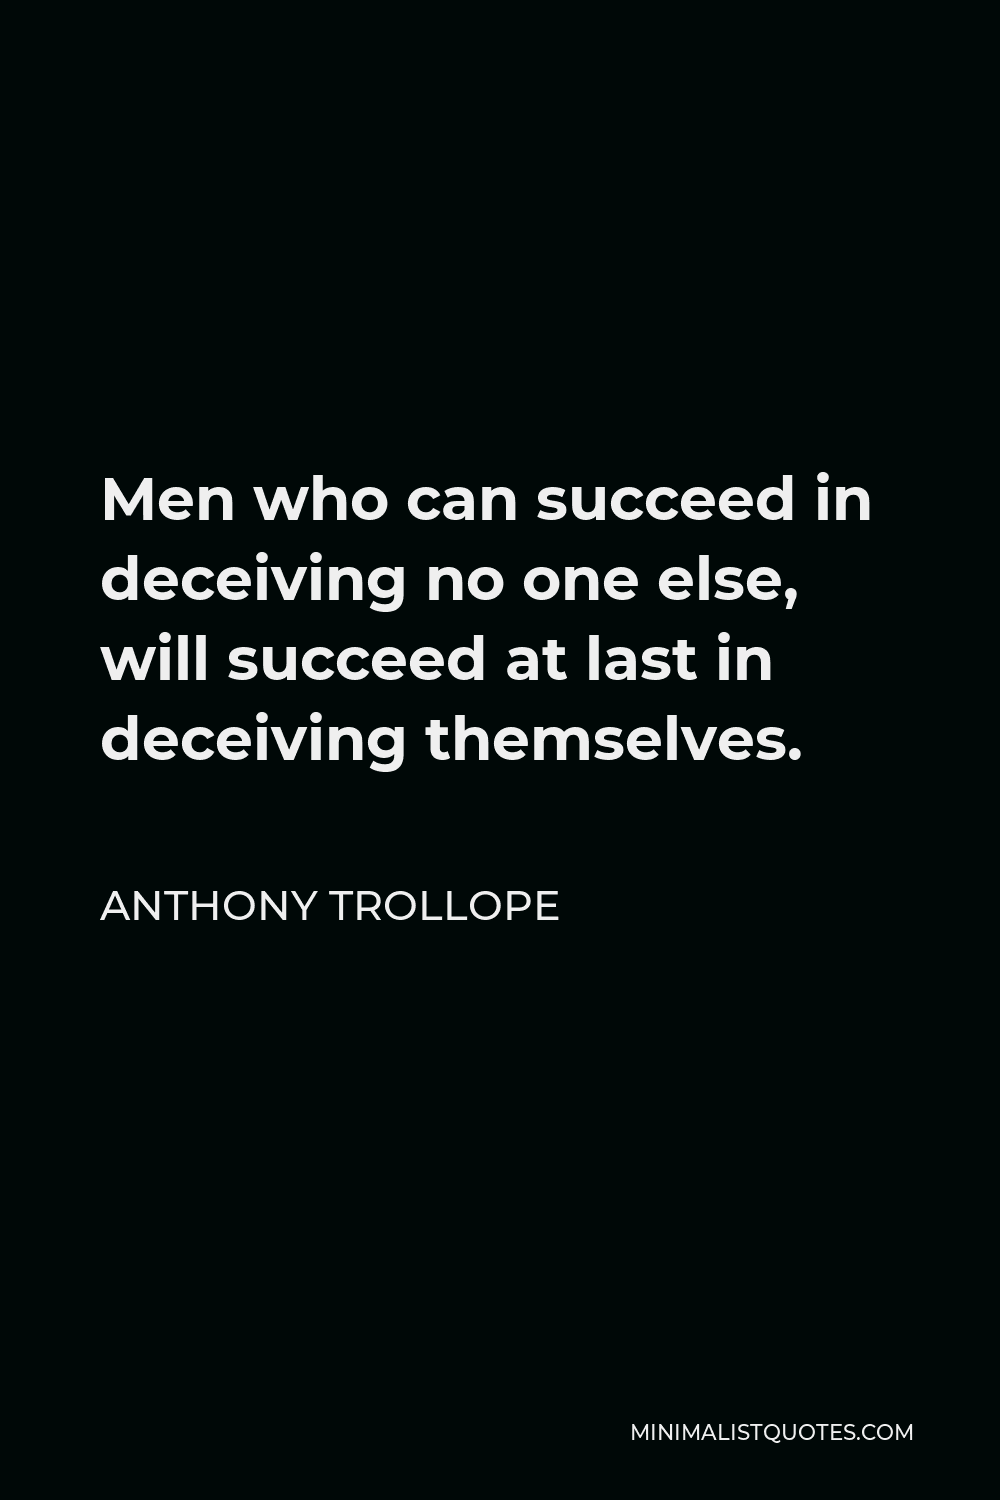 Anthony Trollope Quote - Men who can succeed in deceiving no one else, will succeed at last in deceiving themselves.